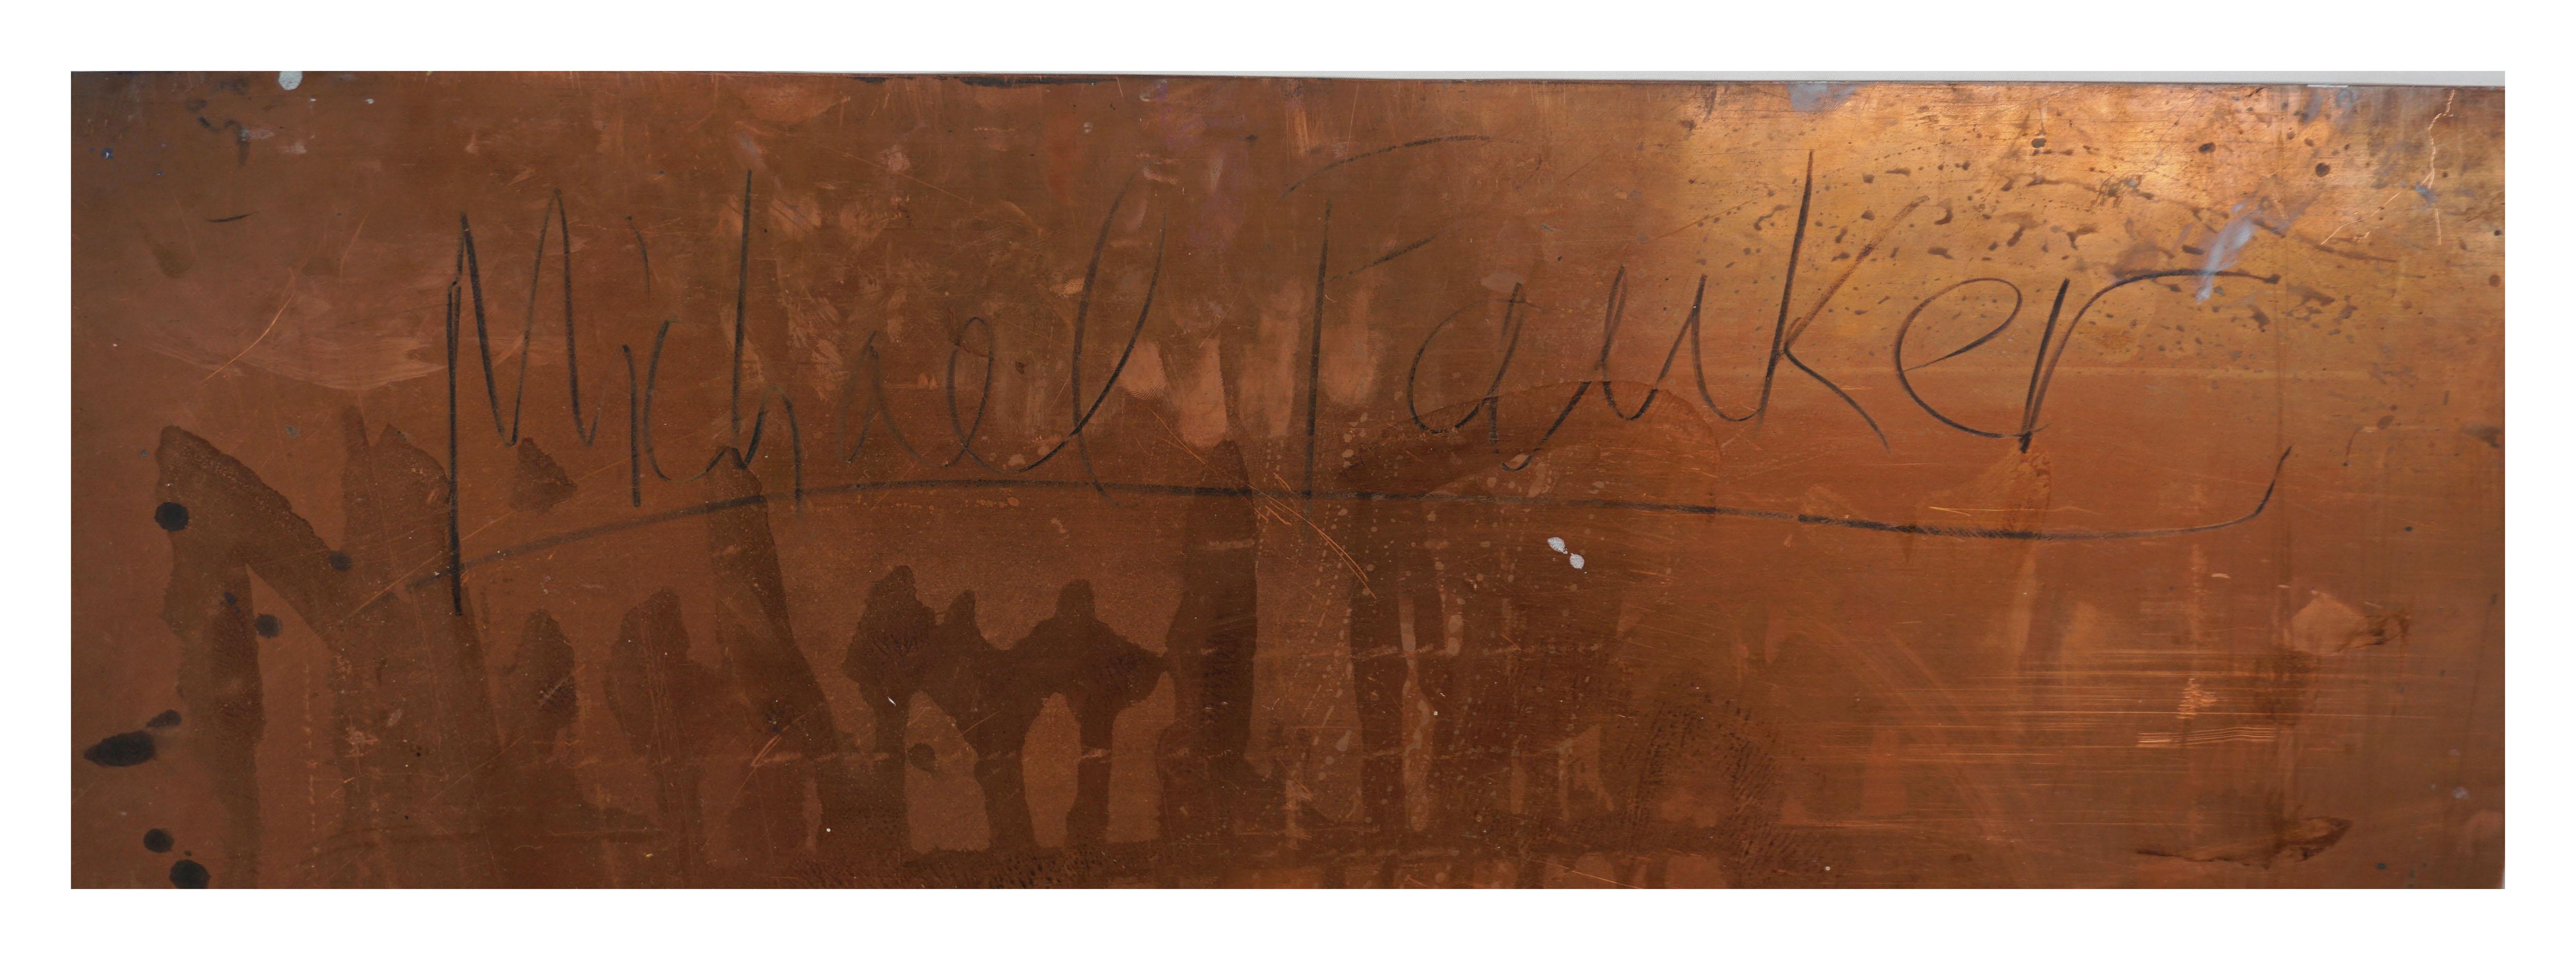 Calligraphy Web Abstract on Reclaimed Copper - Abstract Expressionist Painting by Michael Pauker 